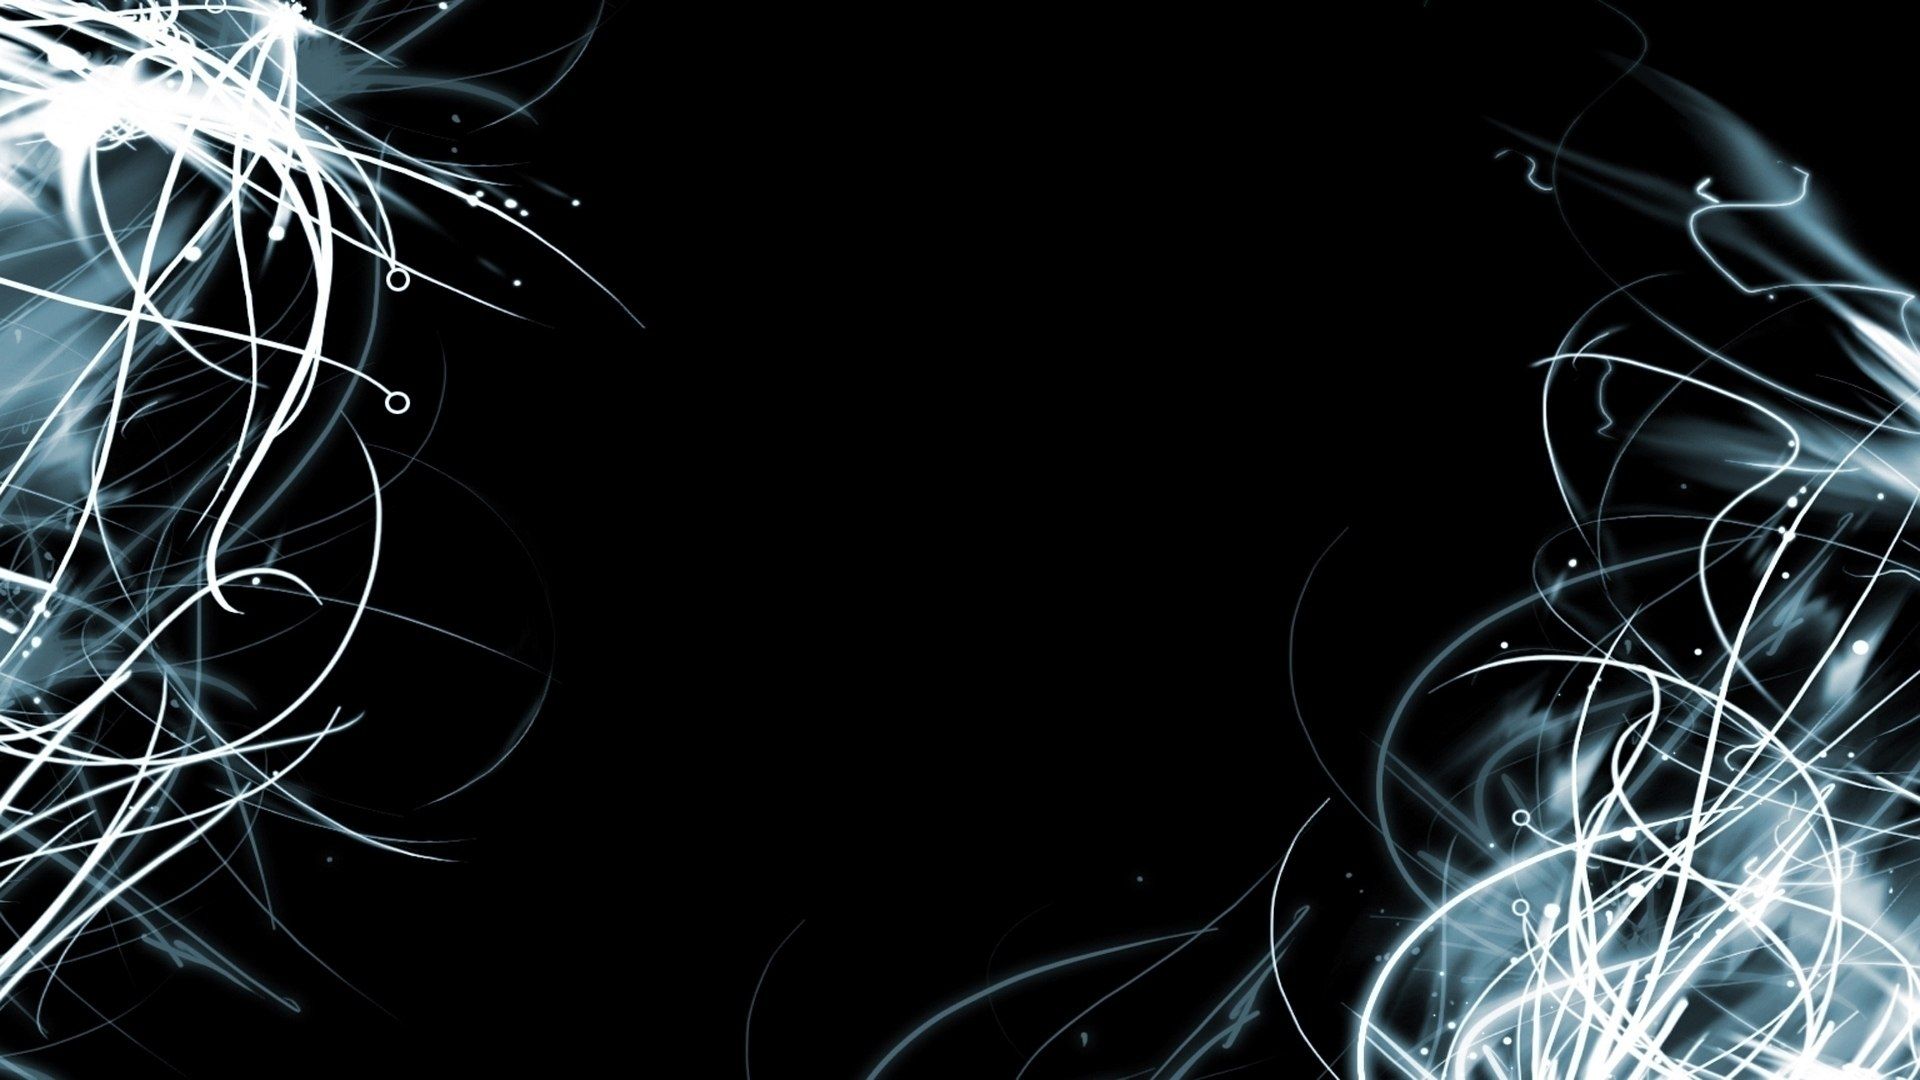 Black white wallpaper 1920x1080 - (#41555) - High Quality and ...